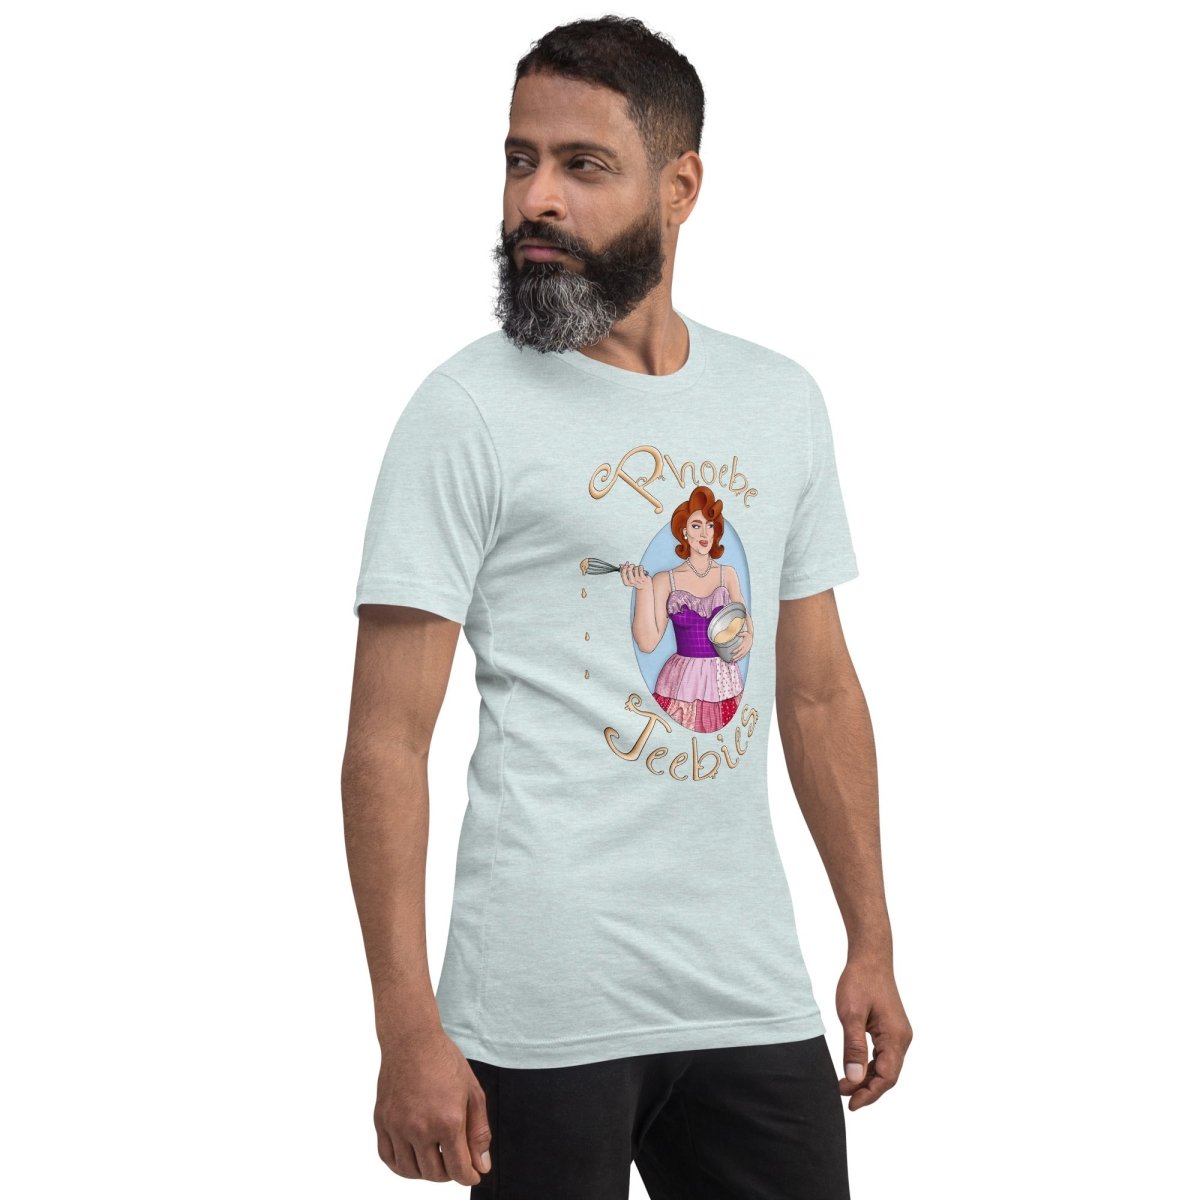 Phoebe Jeebies - Baked T-Shirt - dragqueenmerch